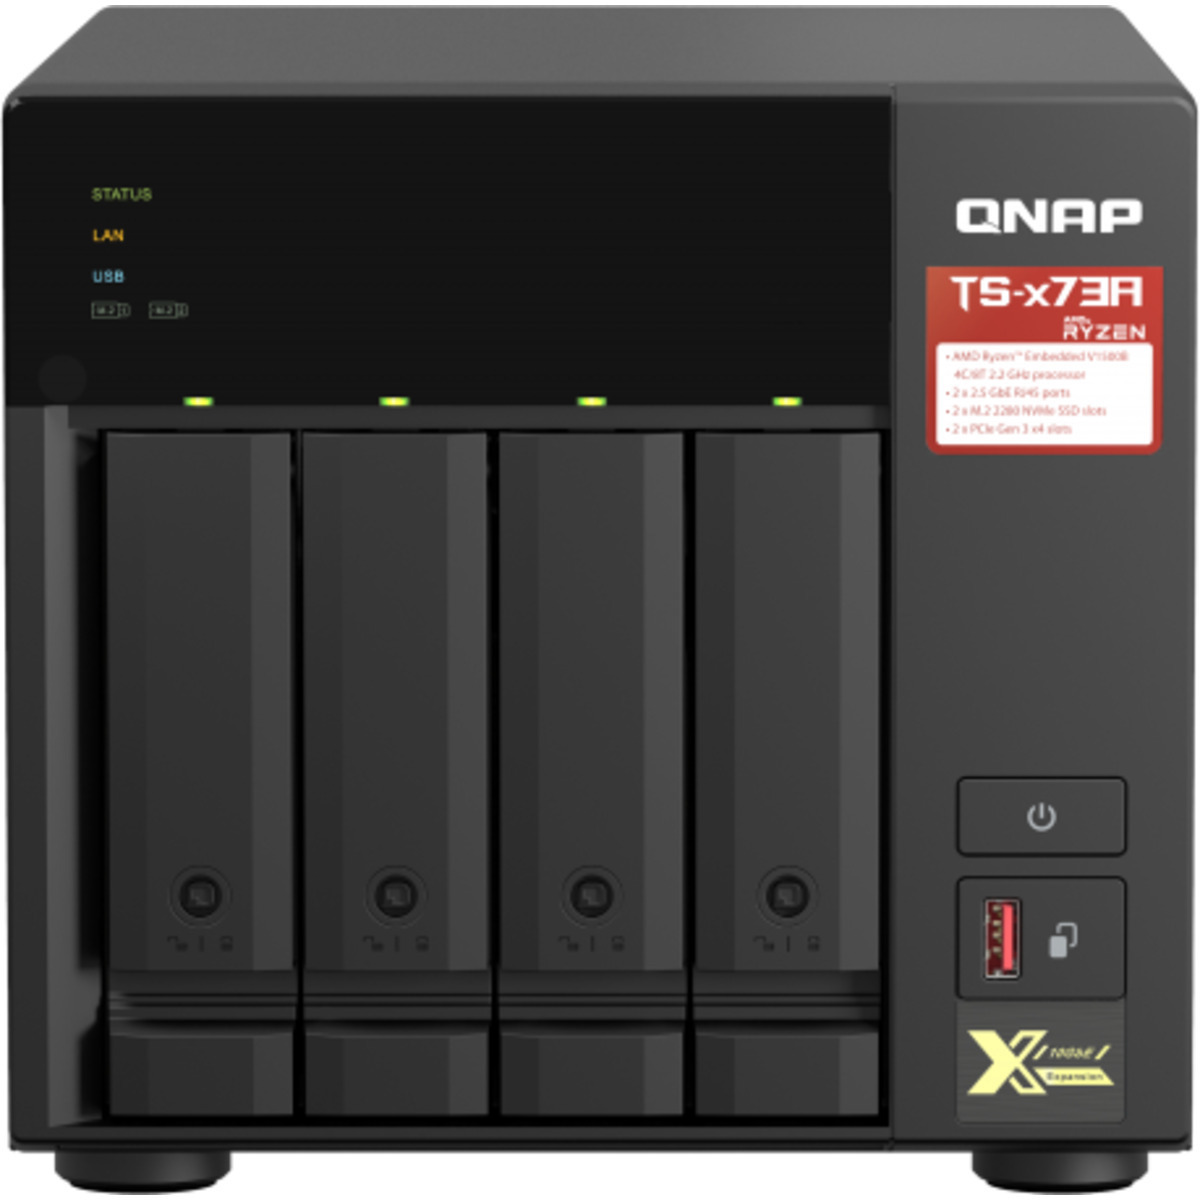 QNAP TS-473A 8tb 4-Bay Desktop Multimedia / Power User / Business NAS - Network Attached Storage Device 4x2tb Samsung 870 EVO MZ-77E2T0BAM 2.5 560/530MB/s SATA 6Gb/s SSD CONSUMER Class Drives Installed - Burn-In Tested TS-473A